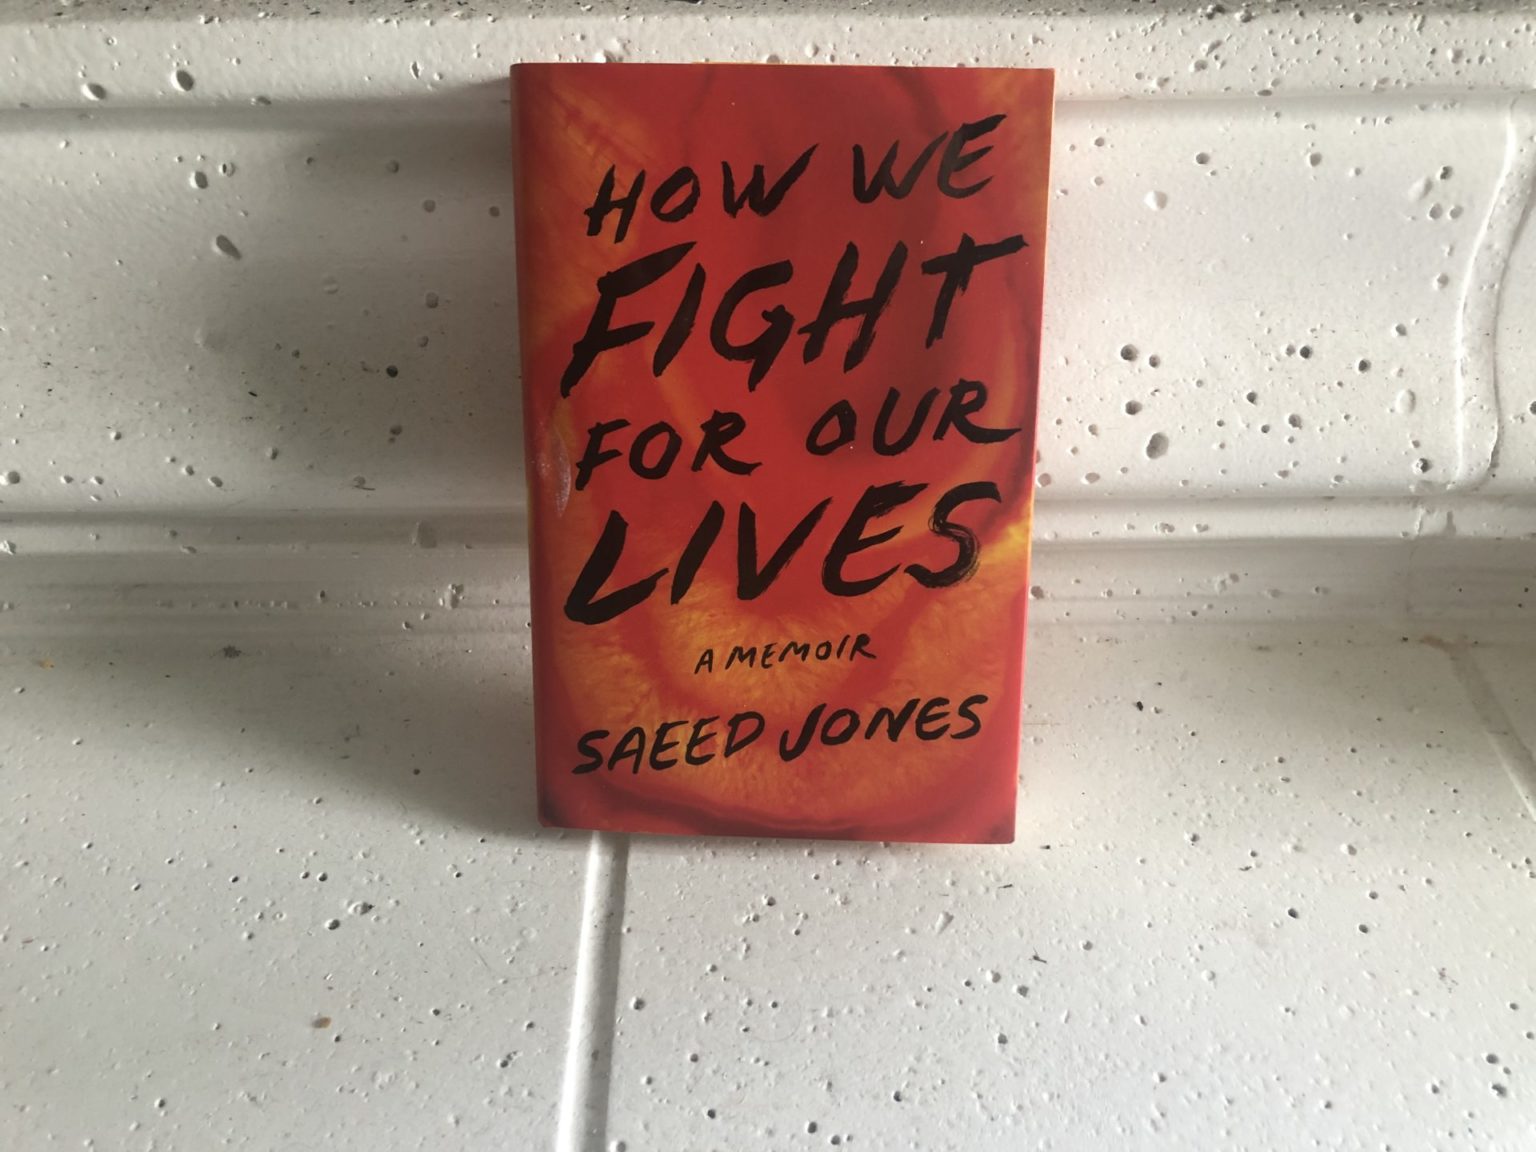 saeed jones how we fight for our lives